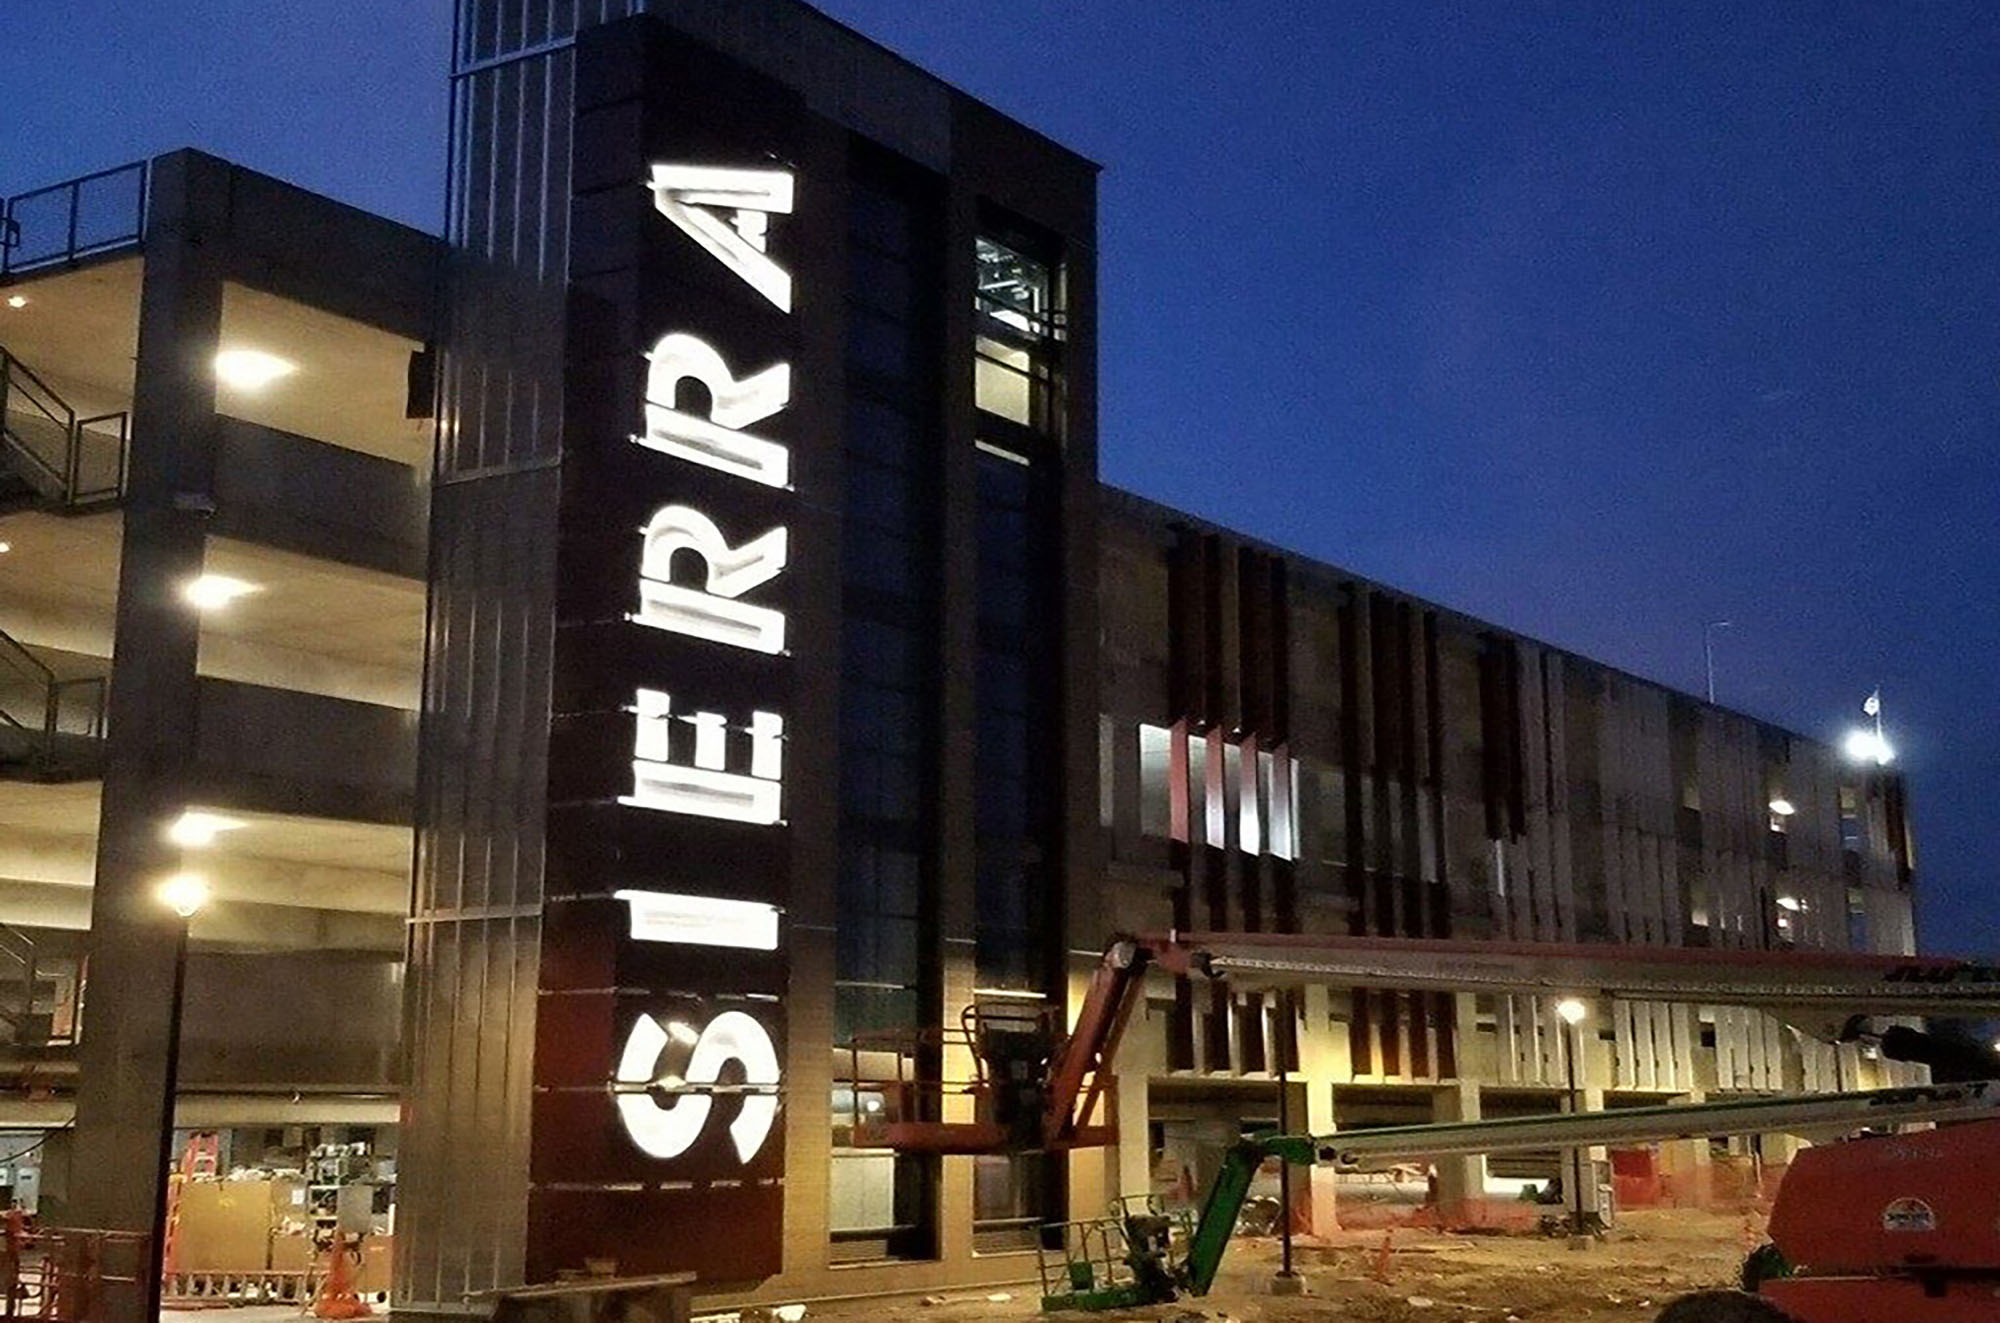 Night picture of construction on new parking garage with large lit up Sierra sign on side of structure.